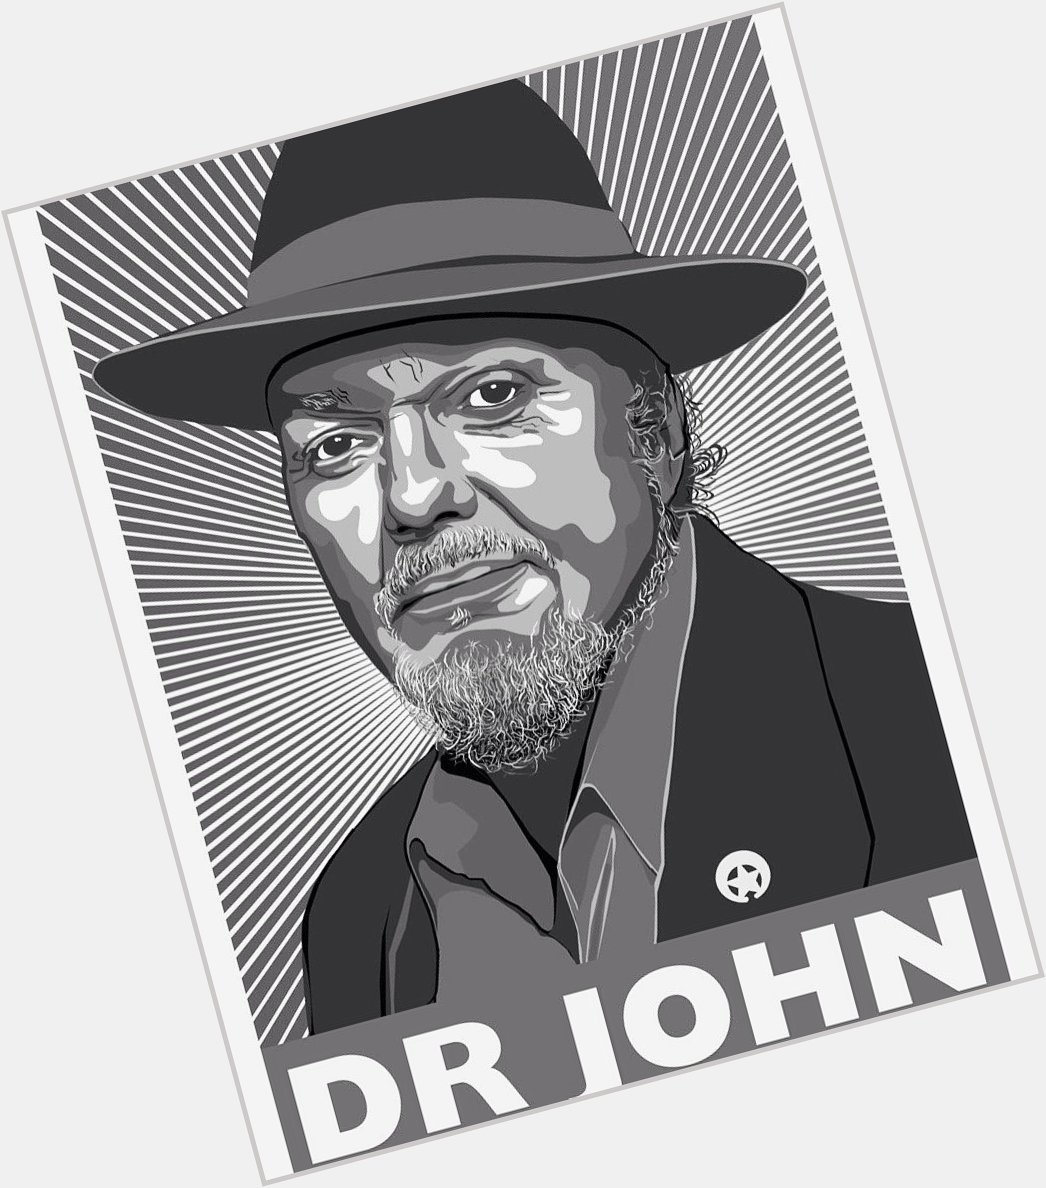 Happy bday to the one and only Mac Rebennack aka Dr. John :) 